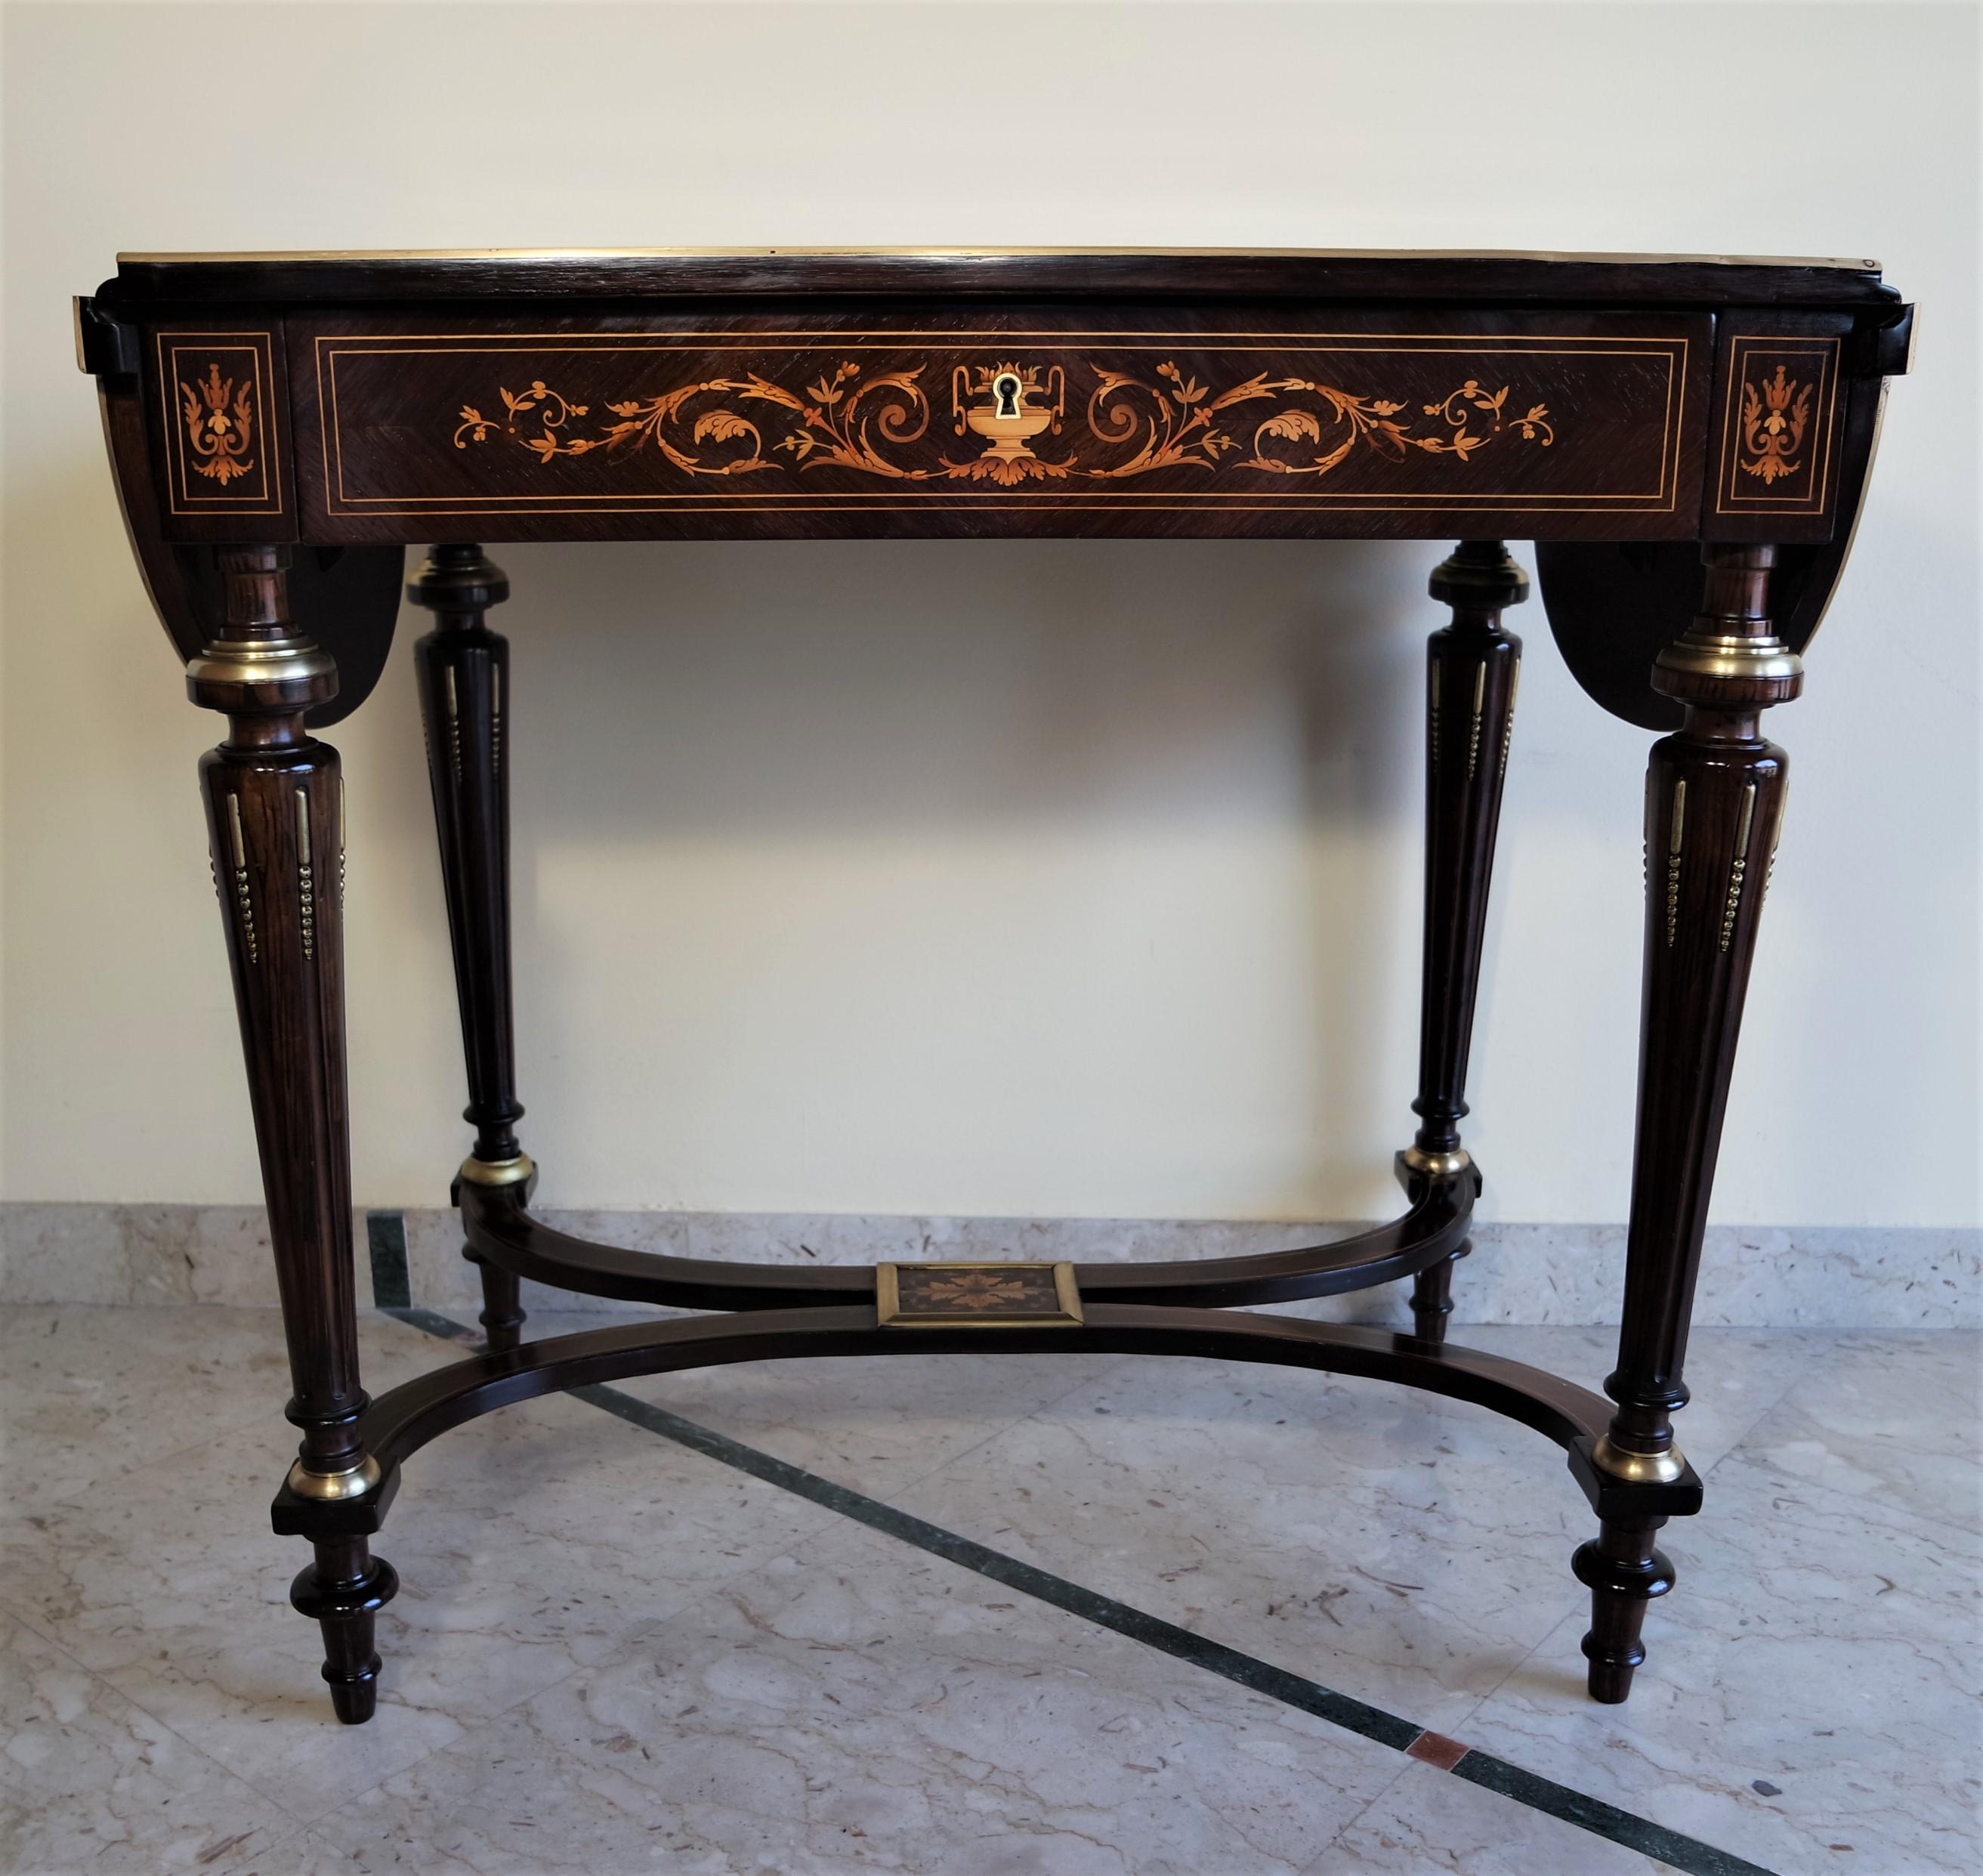 Elegant and inlaid table from late 19th century.
French, in rosewood with precious inlays, typical of Louis XVI style.
In perfect conditions.
Restored and finished with shellac.